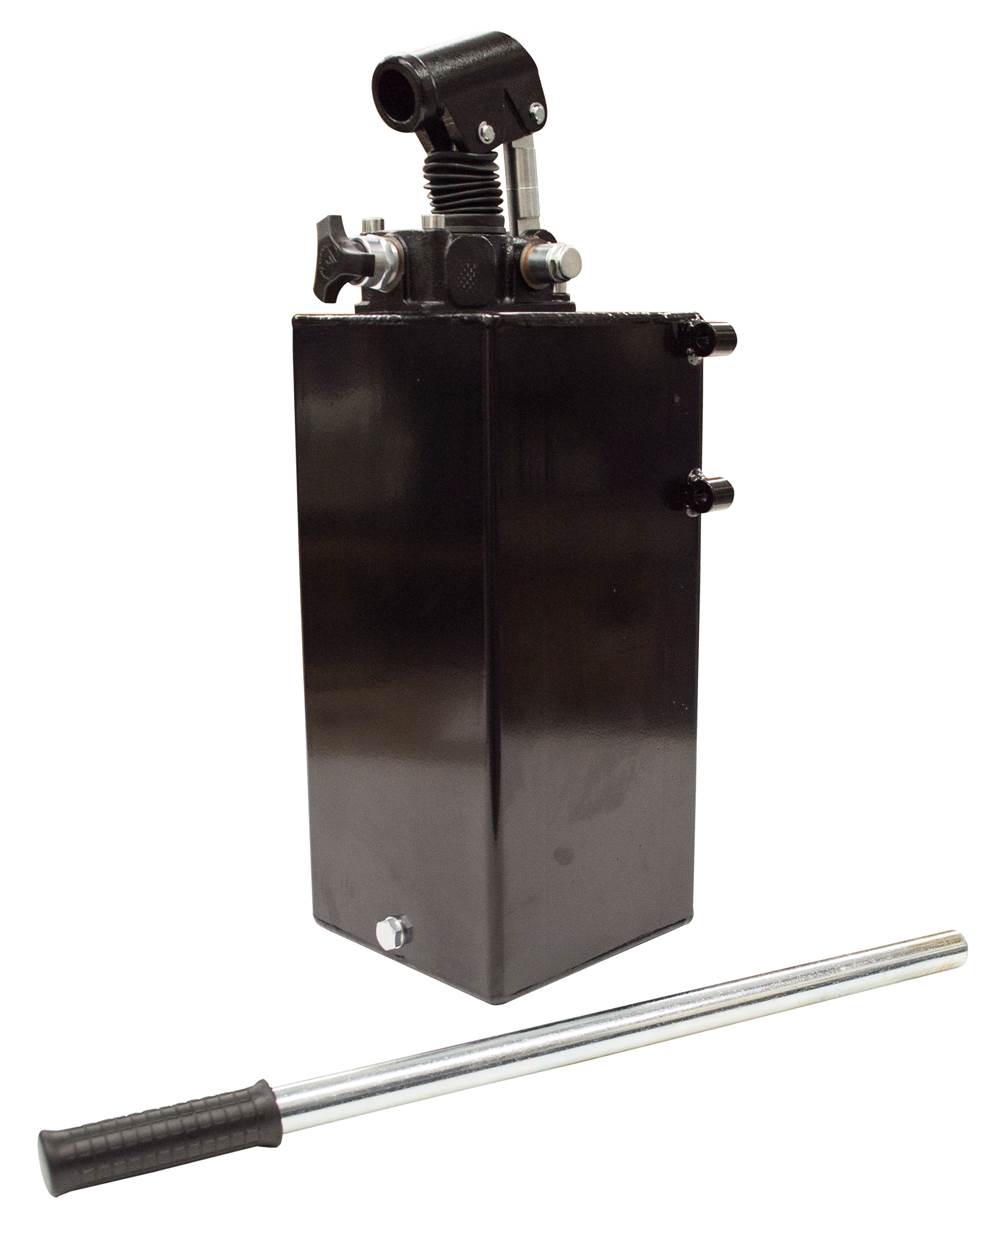 GL Hydraulic single acting Hand Pump assembly 28 cc with release knob, pressure relief valve 280 Bar rated, 10 litre steel tank and 600mm handlever